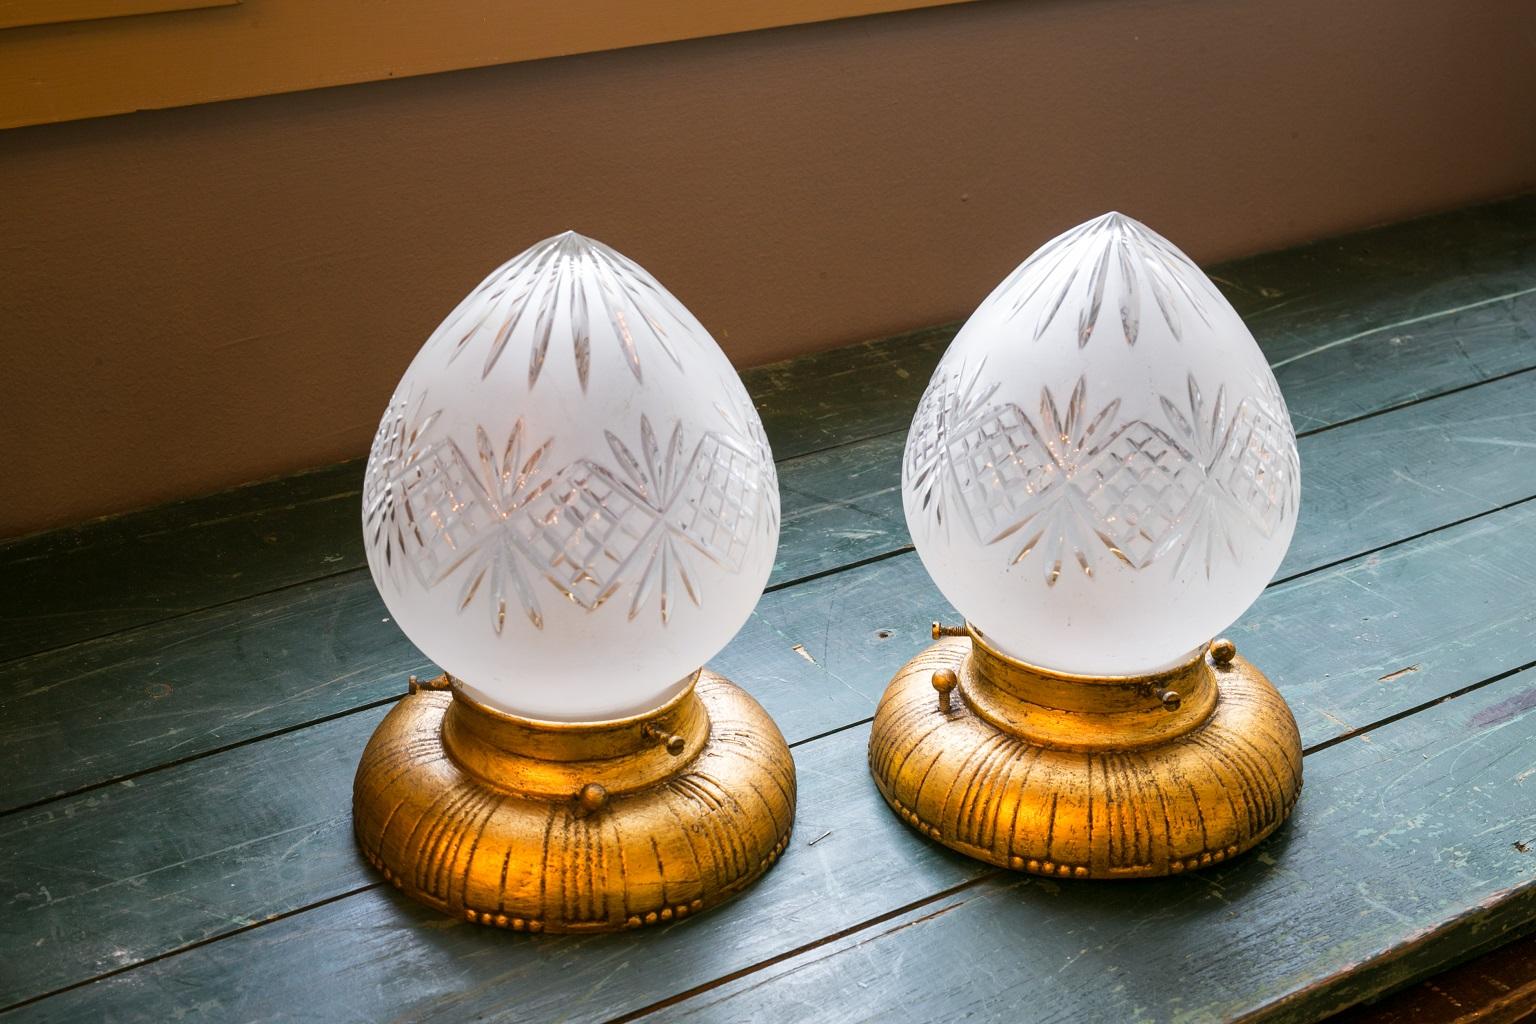 Pair of cut crystal lights (flush mount), circa 1900. Newly wired for use within the USA. The cur glass globes are antique and simple and beautiful.  The lights could also be mounted on the wall as sconces.